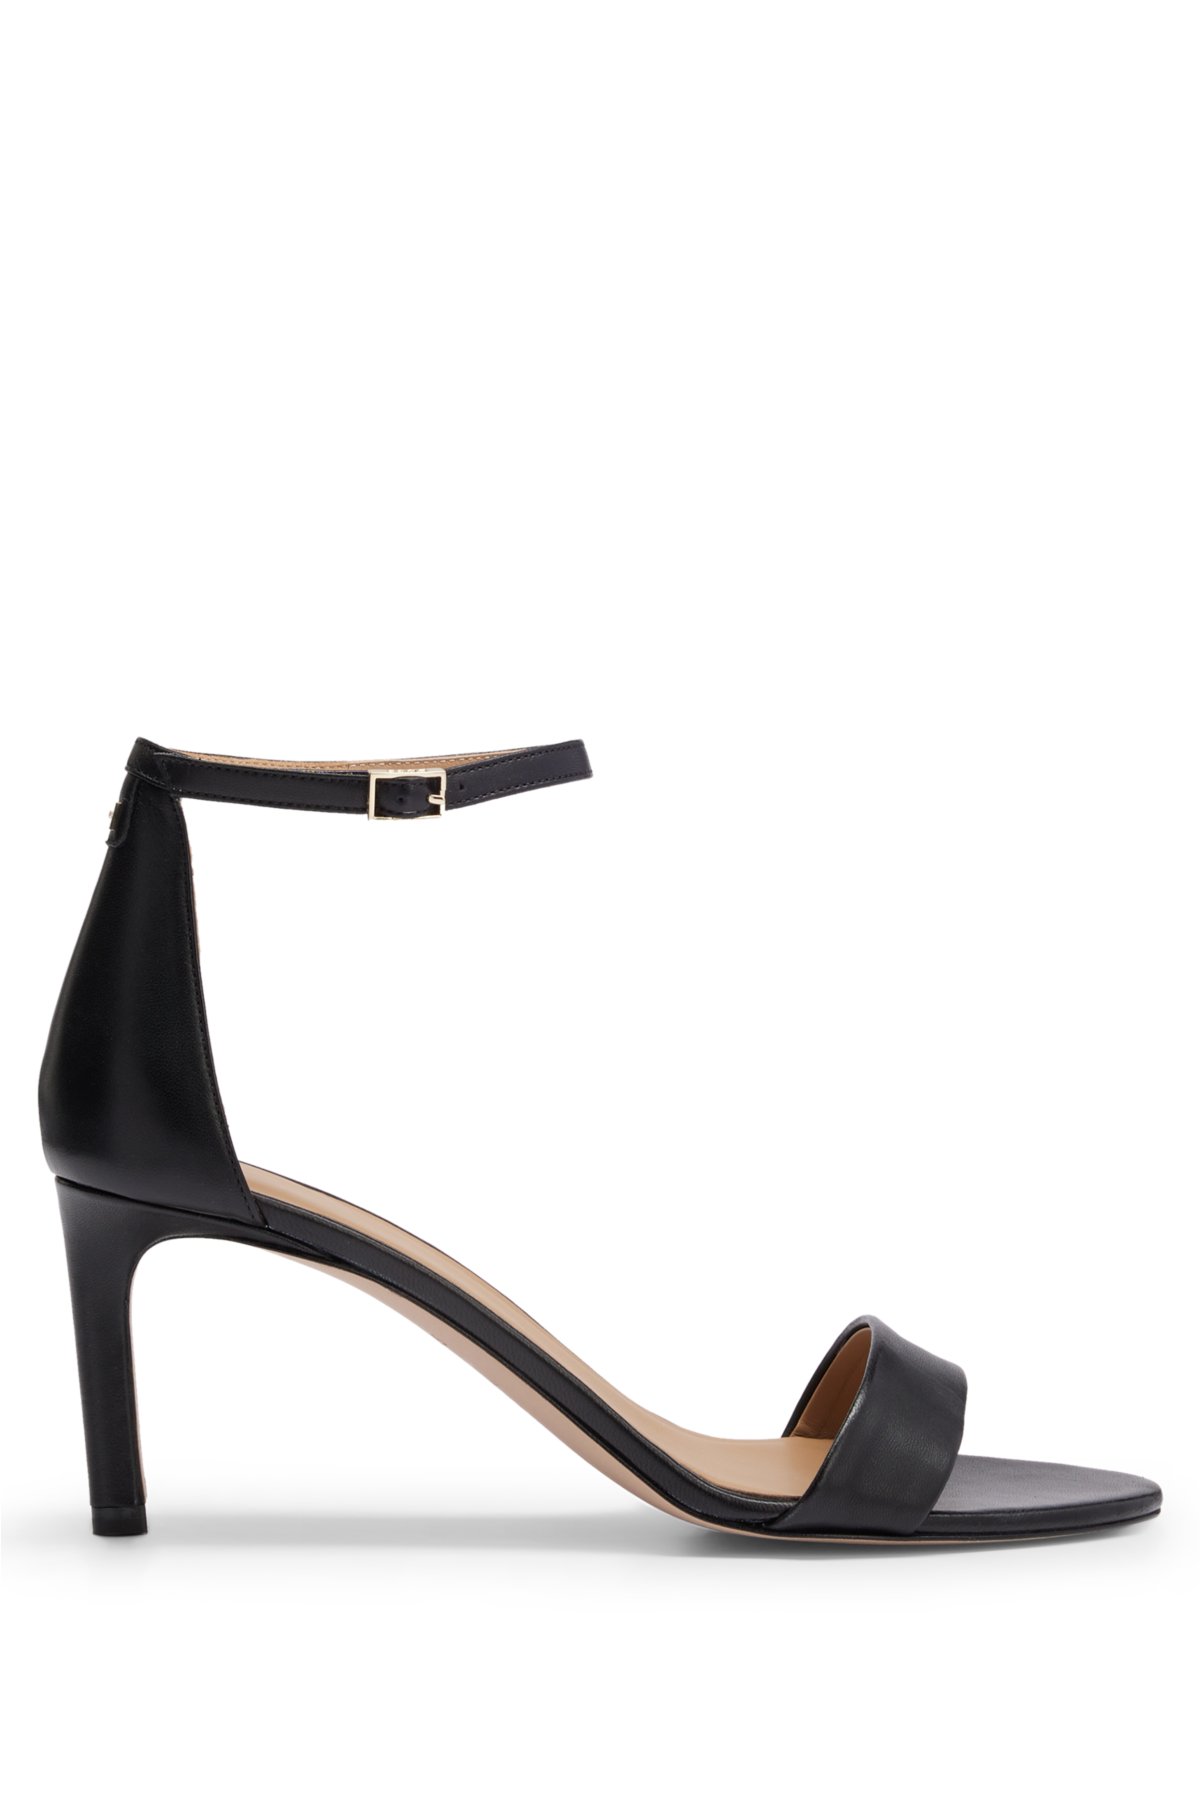 BOSS - Nappa-leather strappy sandals with 7cm heel